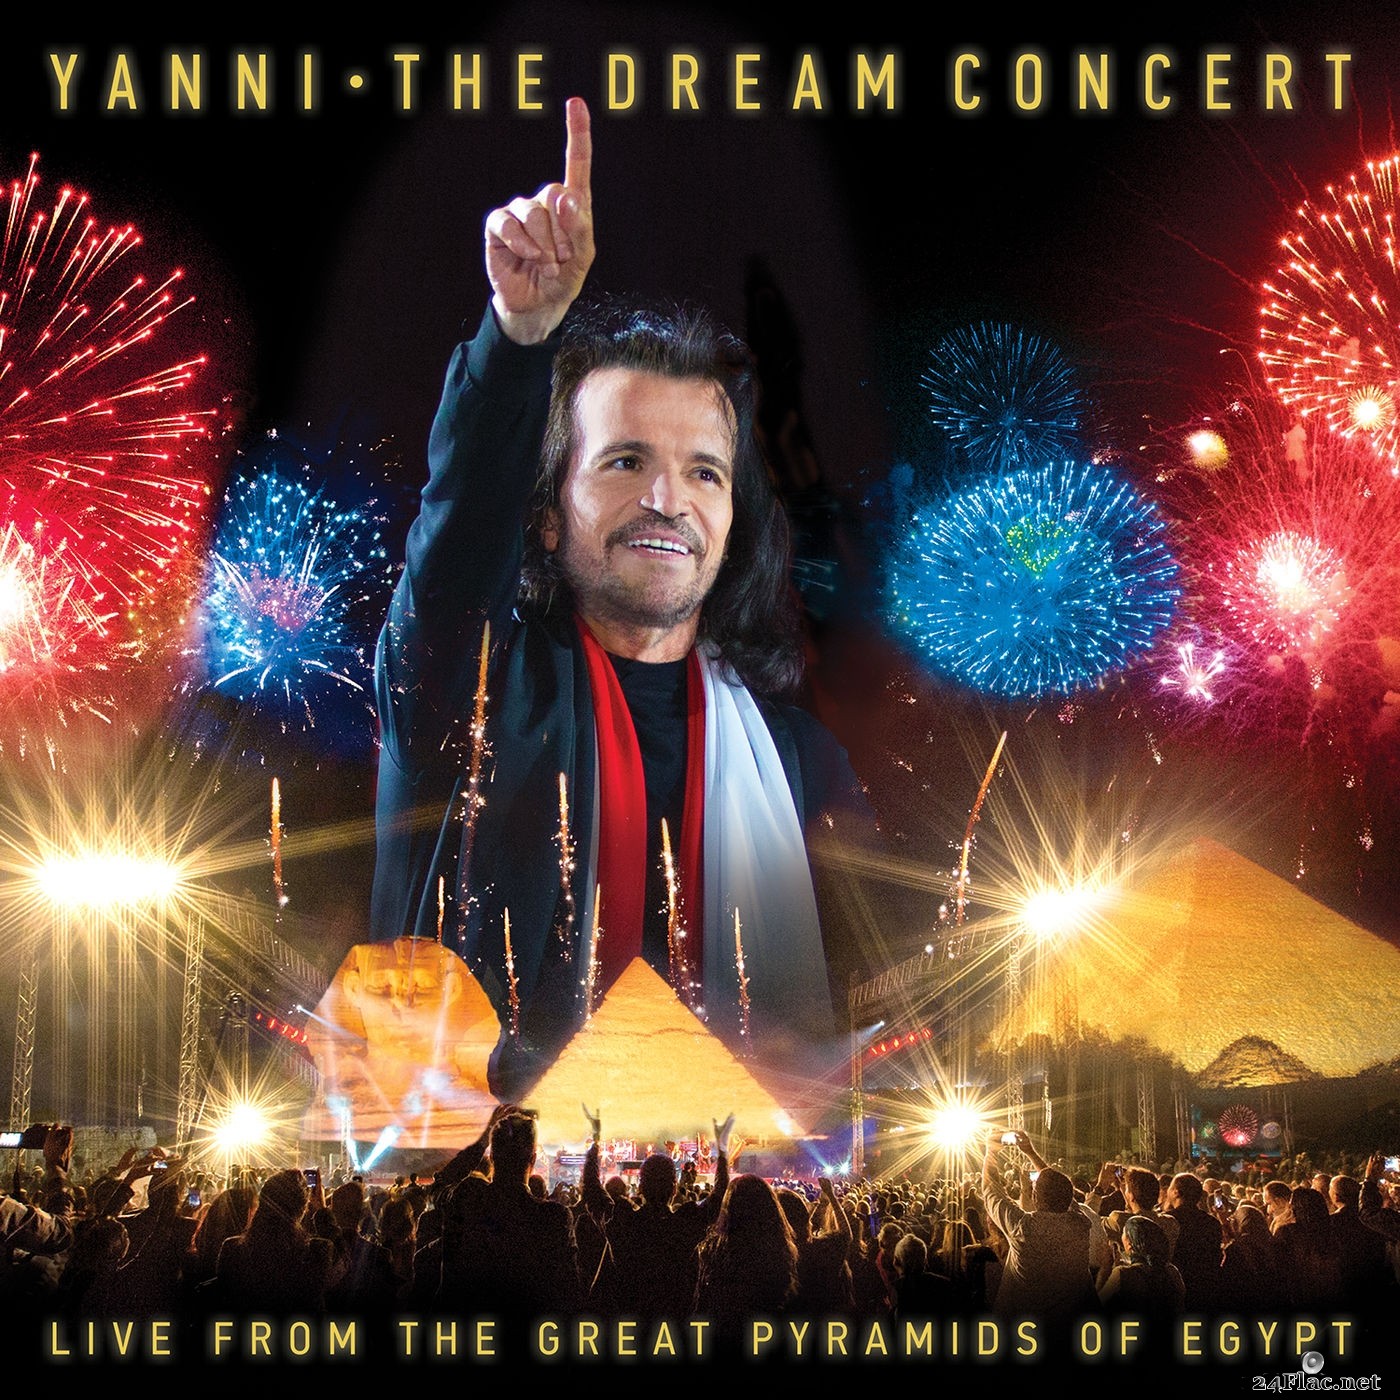 Yanni - The Dream Concert: Live from the Great Pyramids of Egypt (2016) Hi-Res